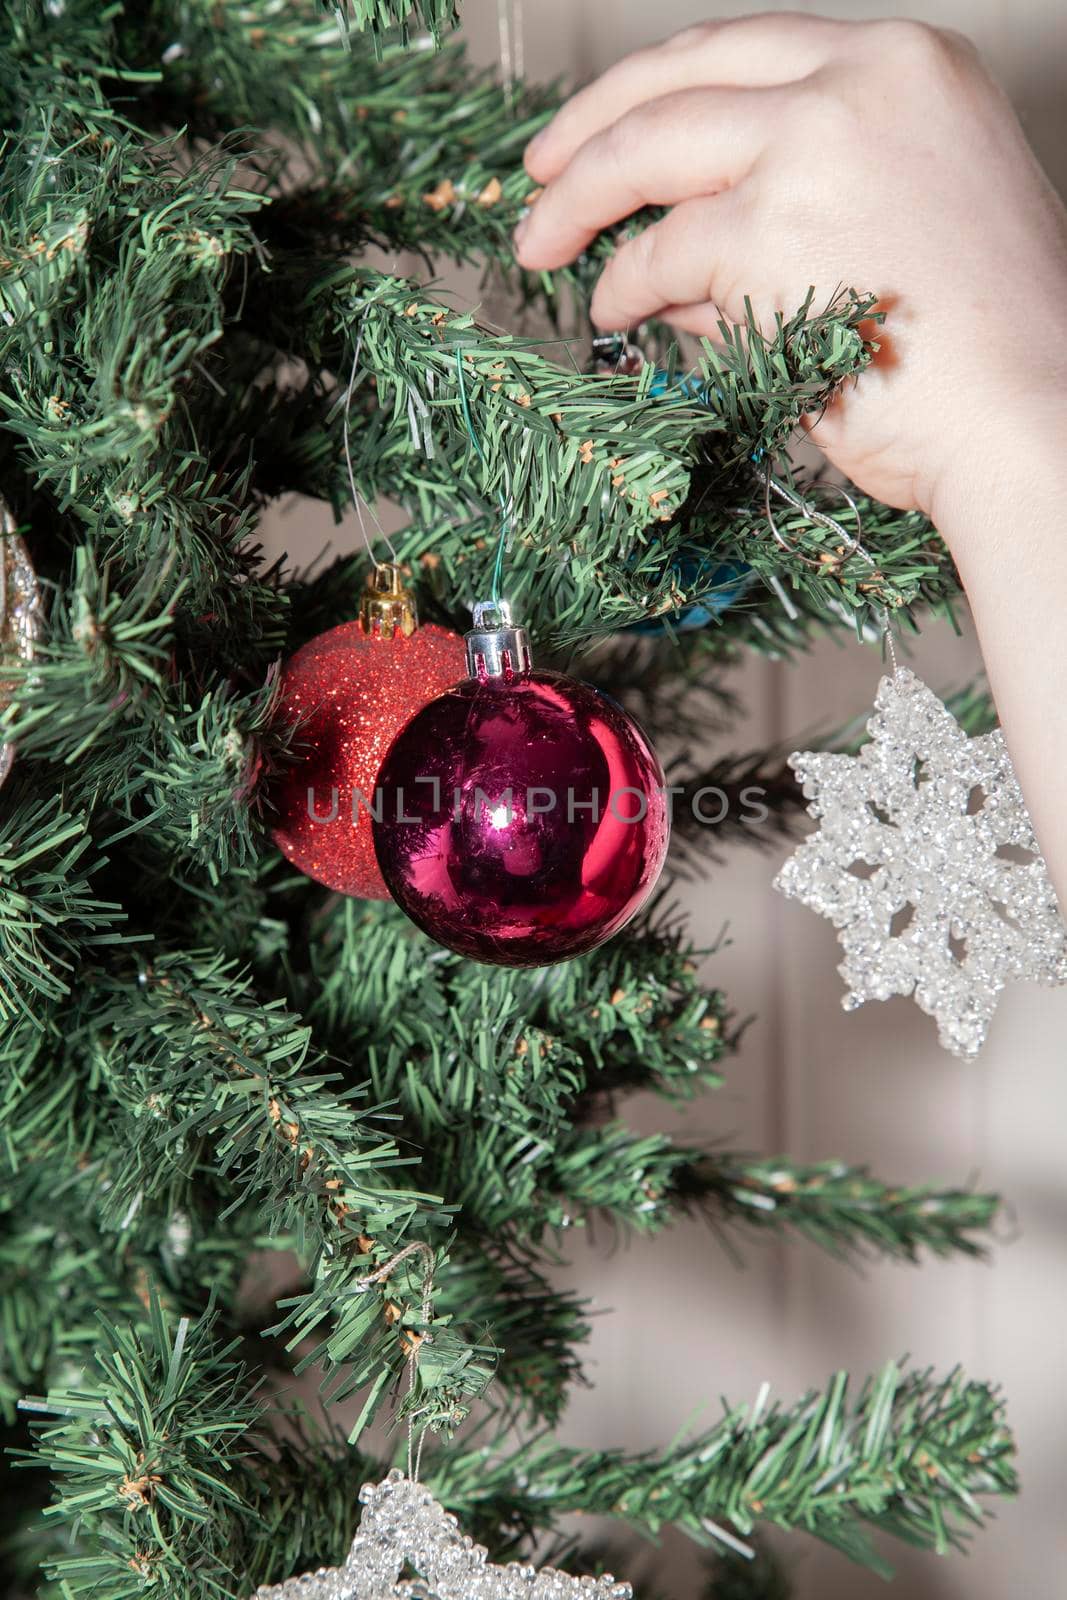 Woman hanging a blue globe on an artificial Christmas tree near purple and glittery red globes and a clear star decorations